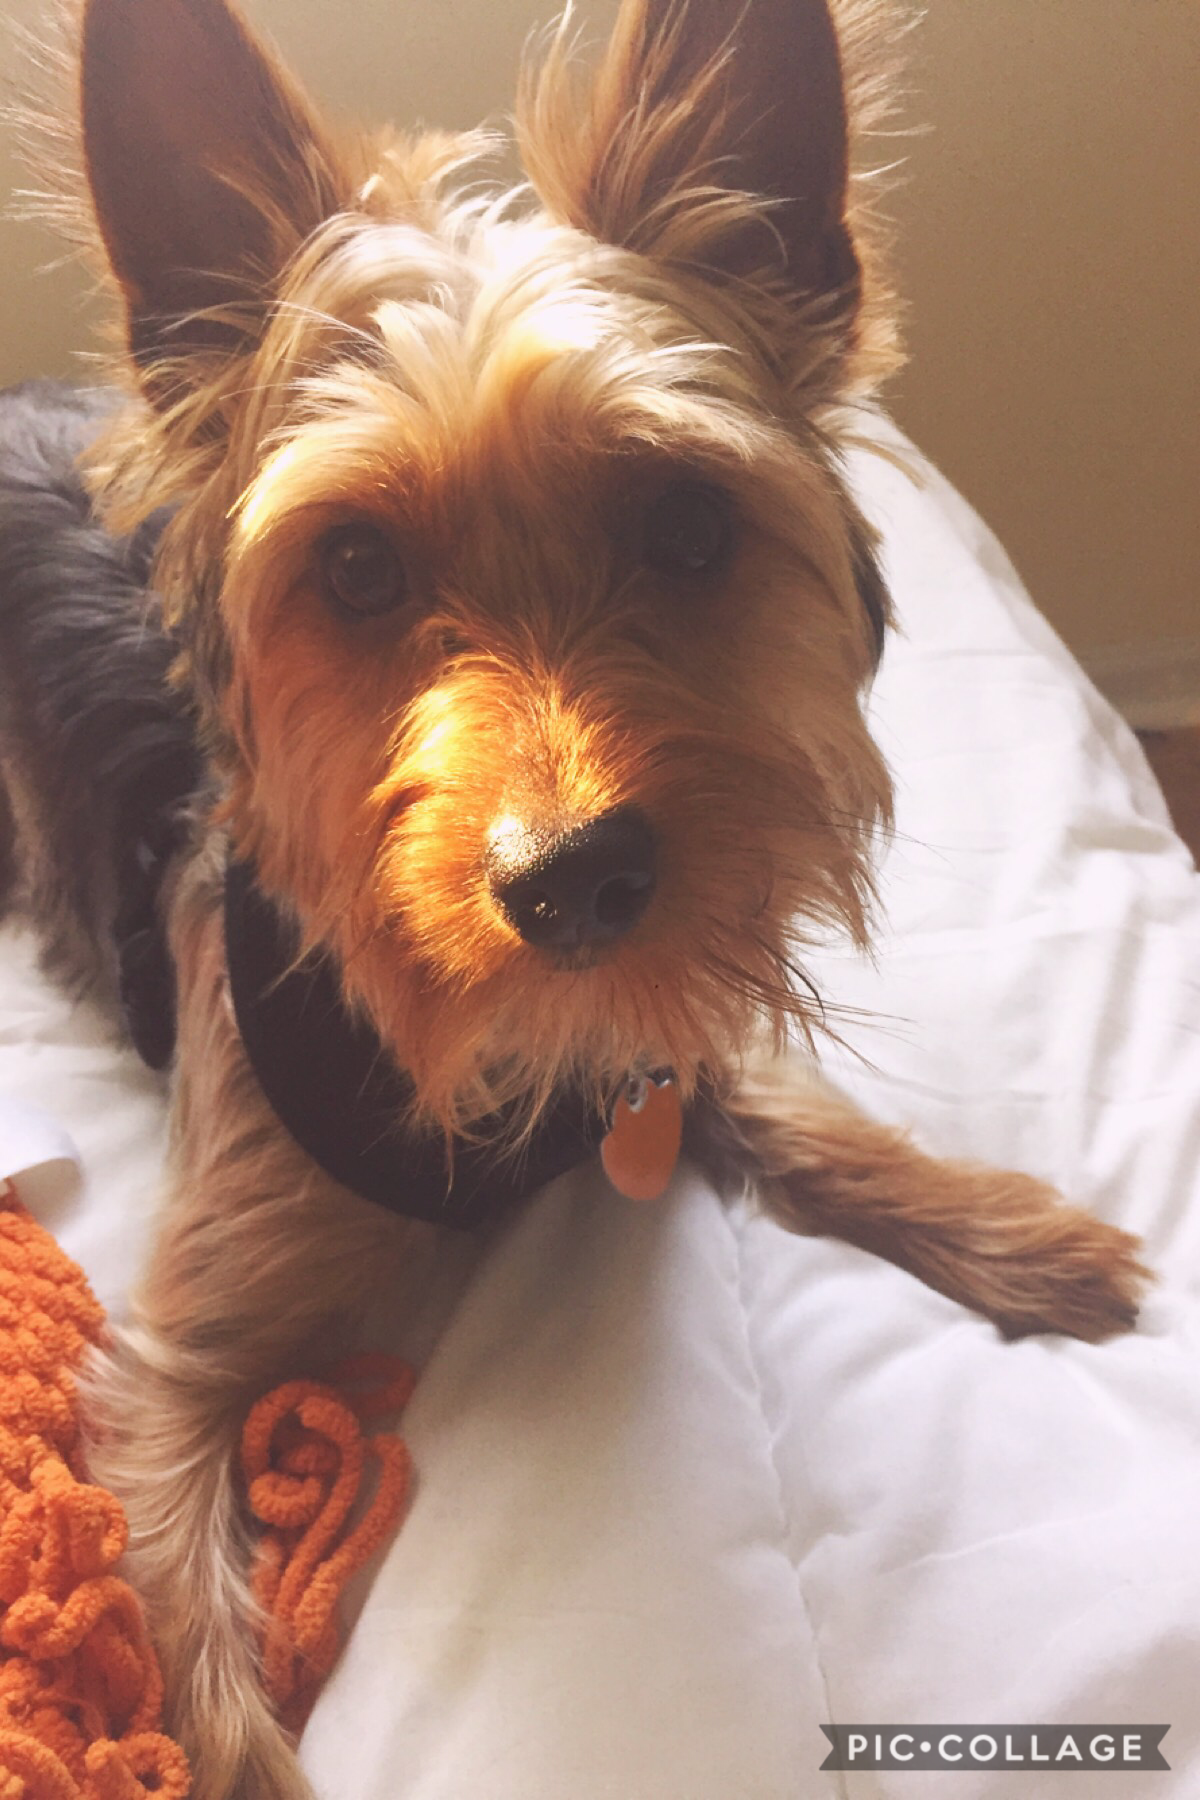 meet captain the cutest yorkshire terrier to ever exist! he’s so funny & snuggly!! this is like my aesthetic<3 